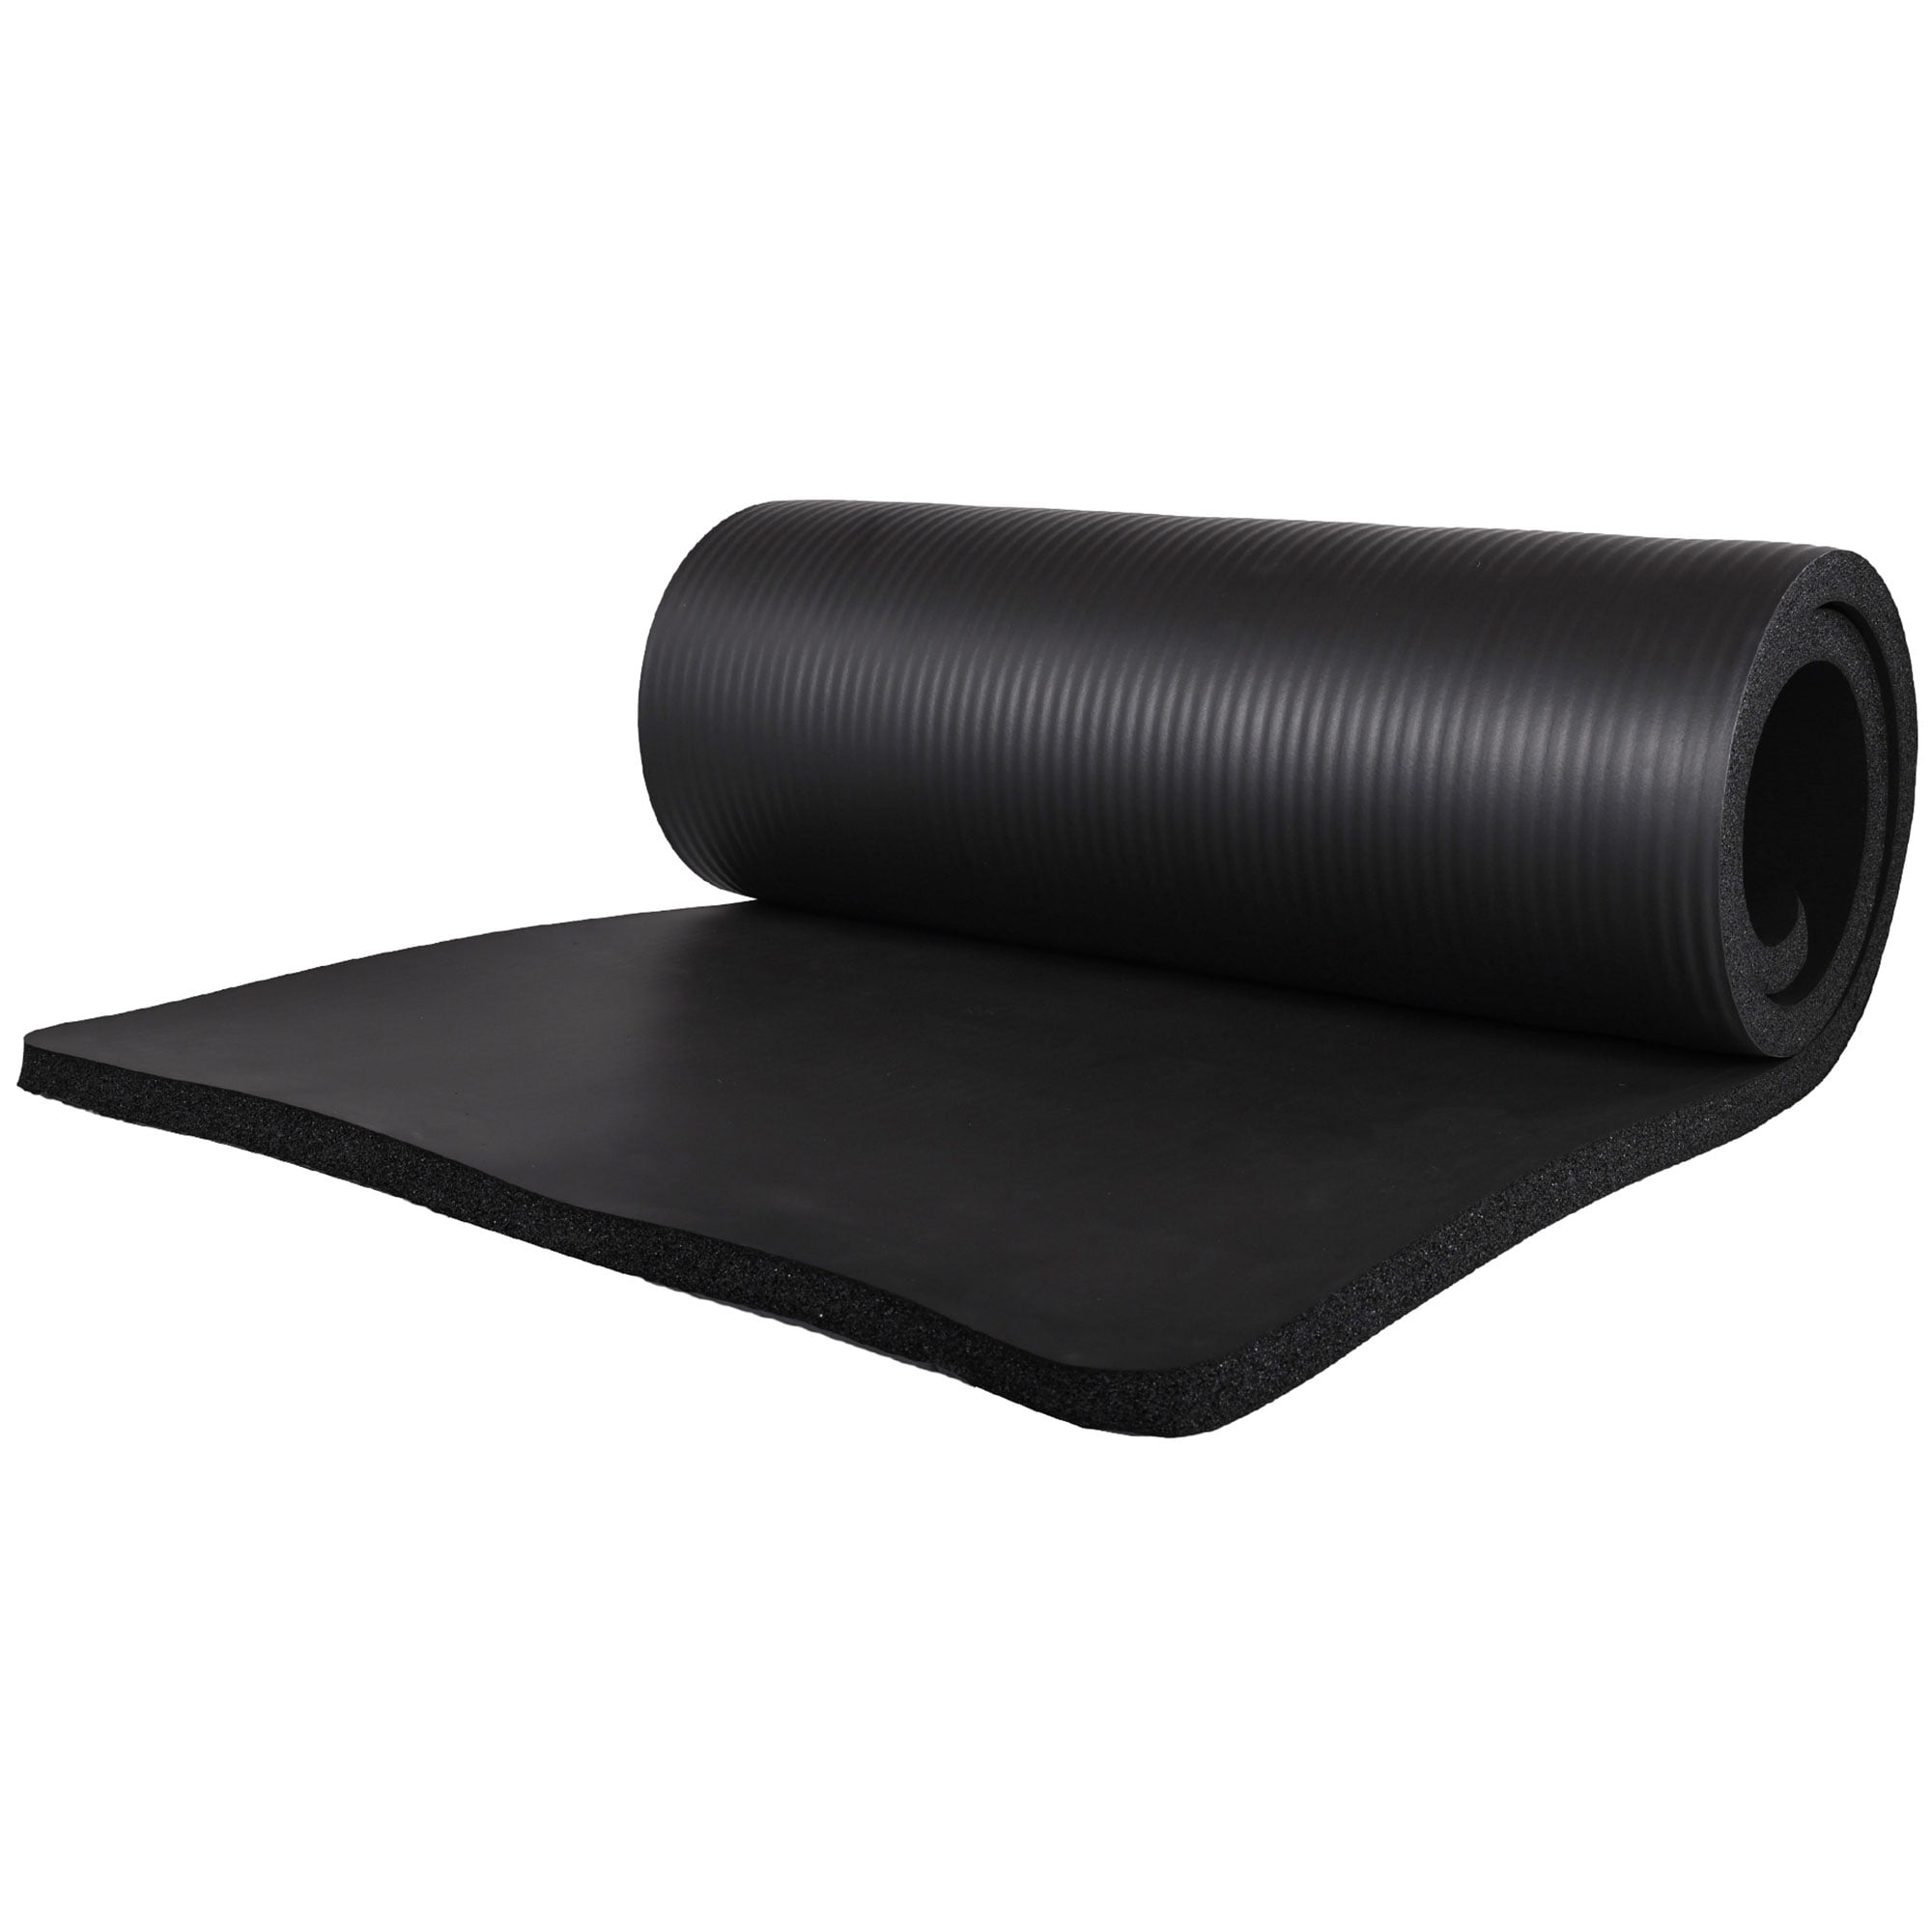 KCO ROLLER BLIND Black UMINEUX YOGA MAT with carrying bag and 2